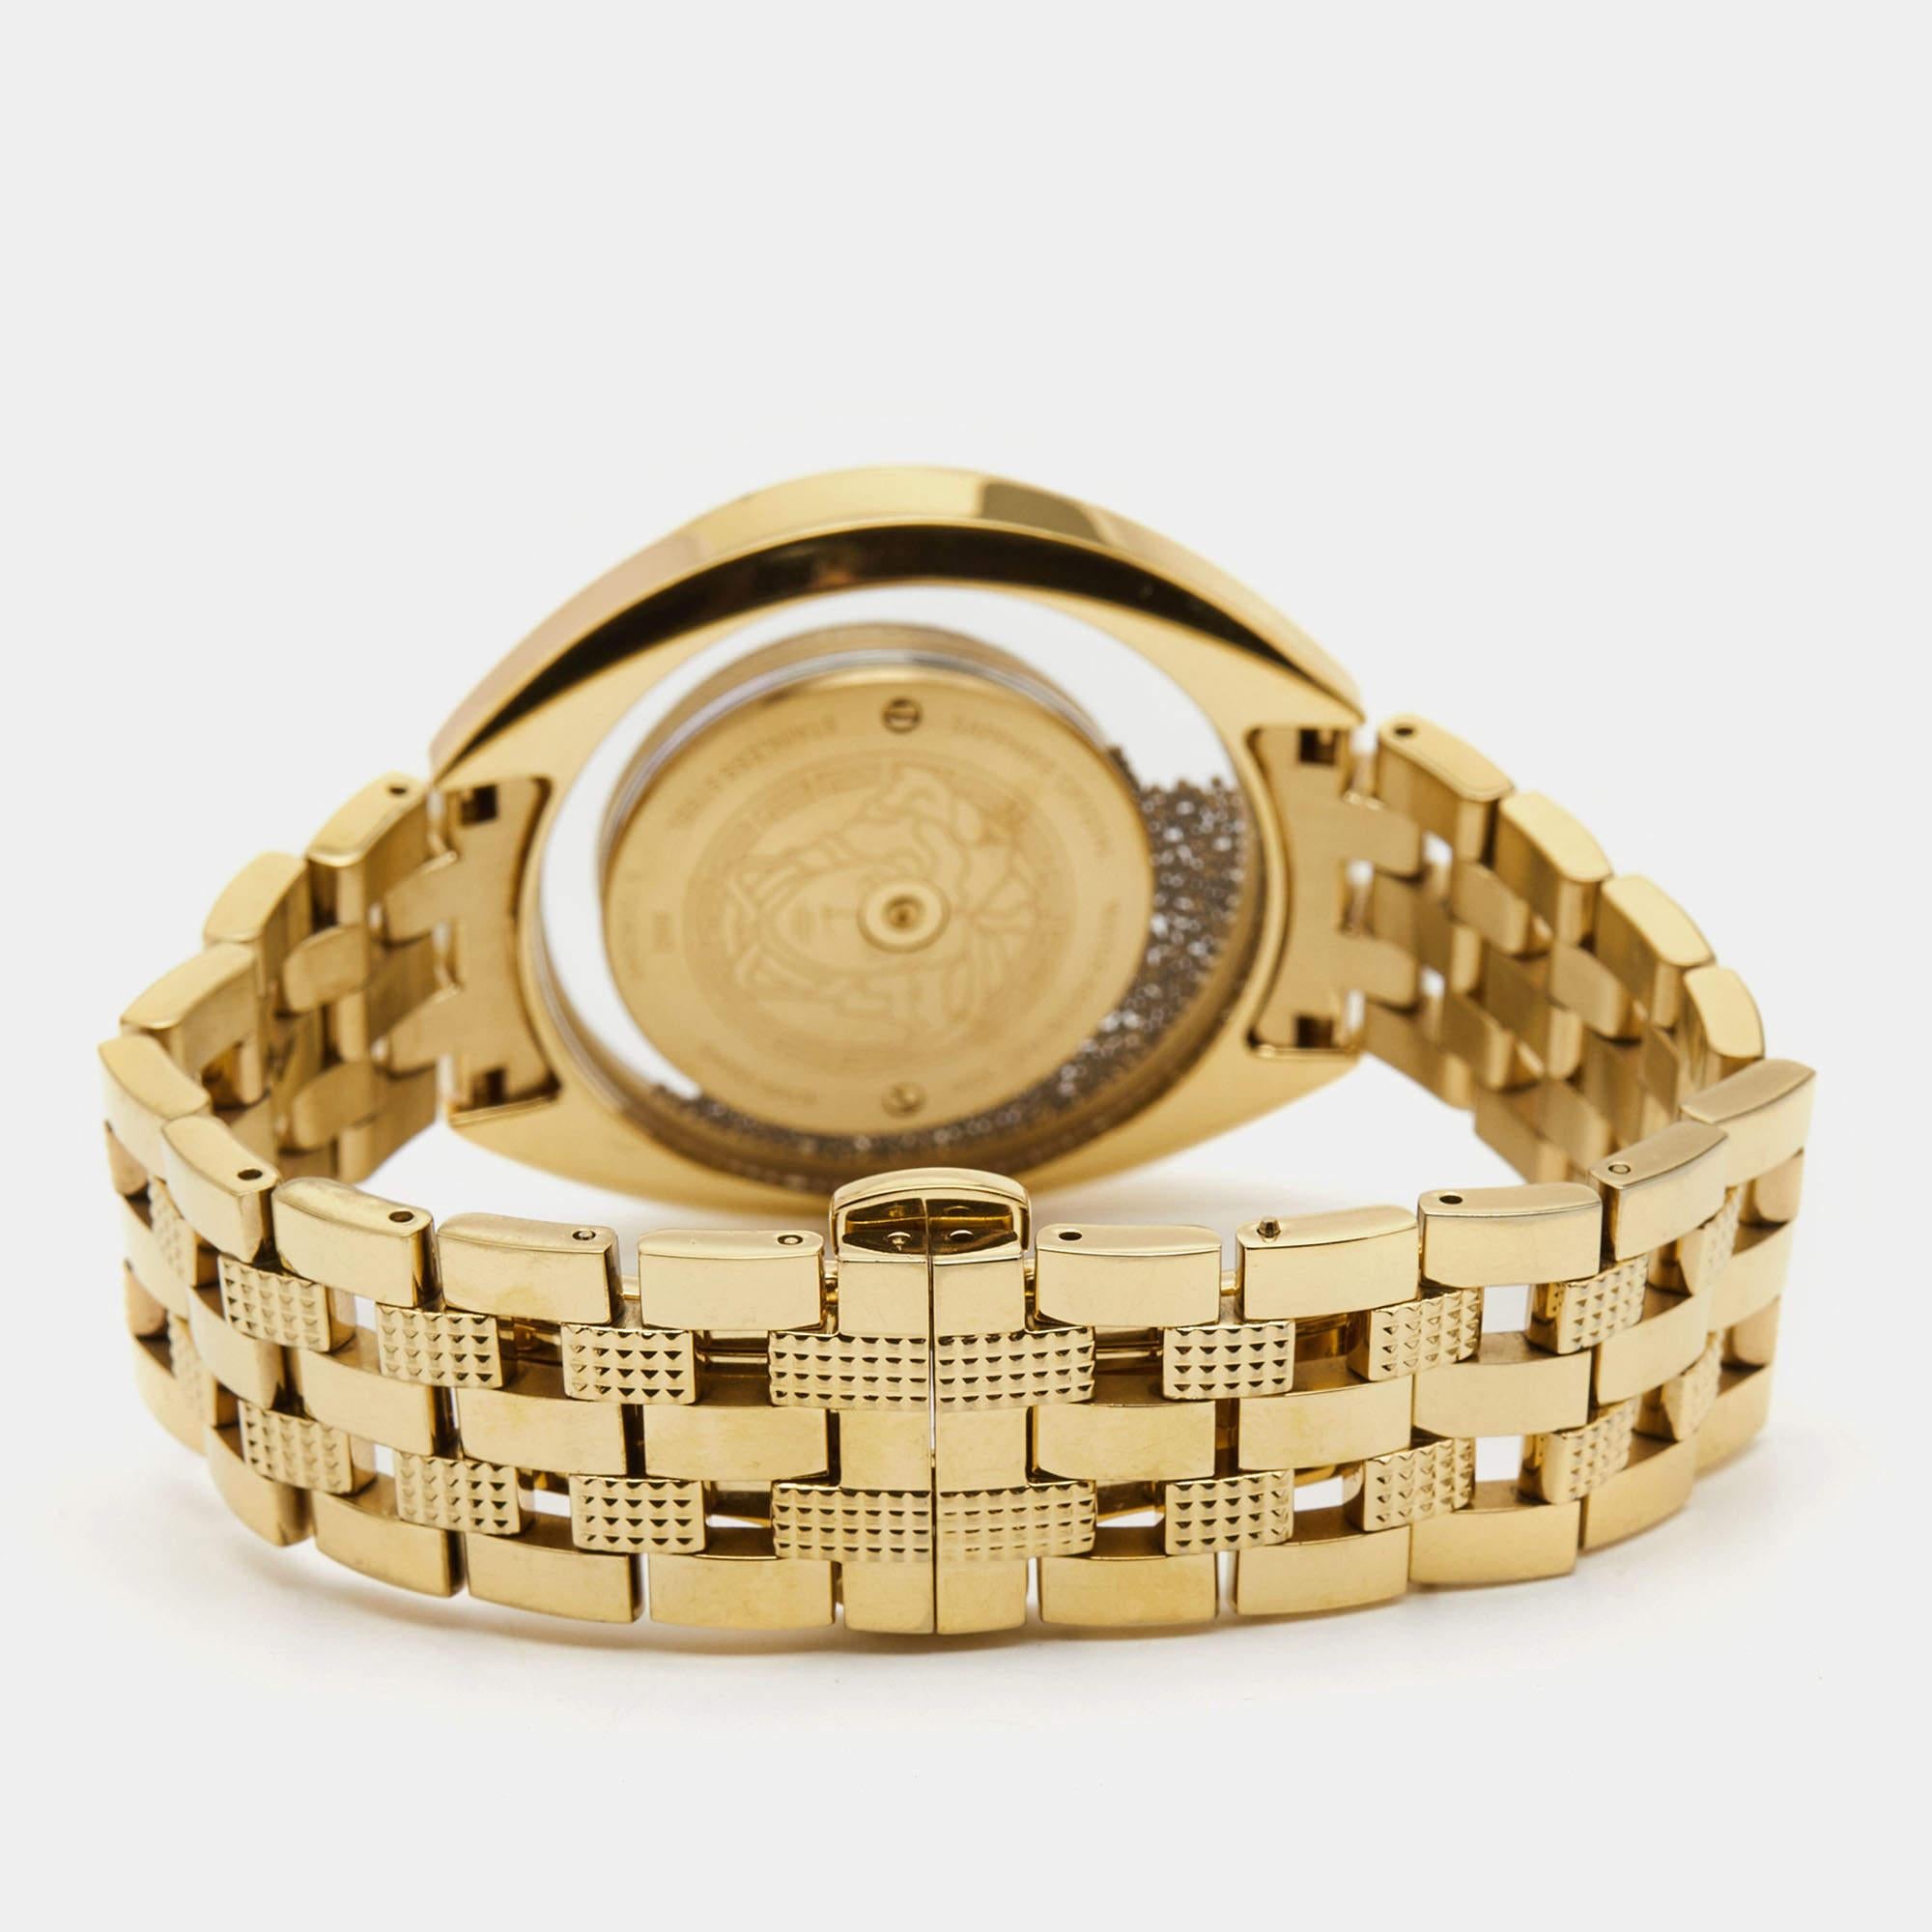 This Versace women's watch is characterized by its skillful craftsmanship and understated charm. Meticulously constructed to tell time in an elegant way, it comes in a sturdy case and flaunts a seamless blend of innovative design and flawless